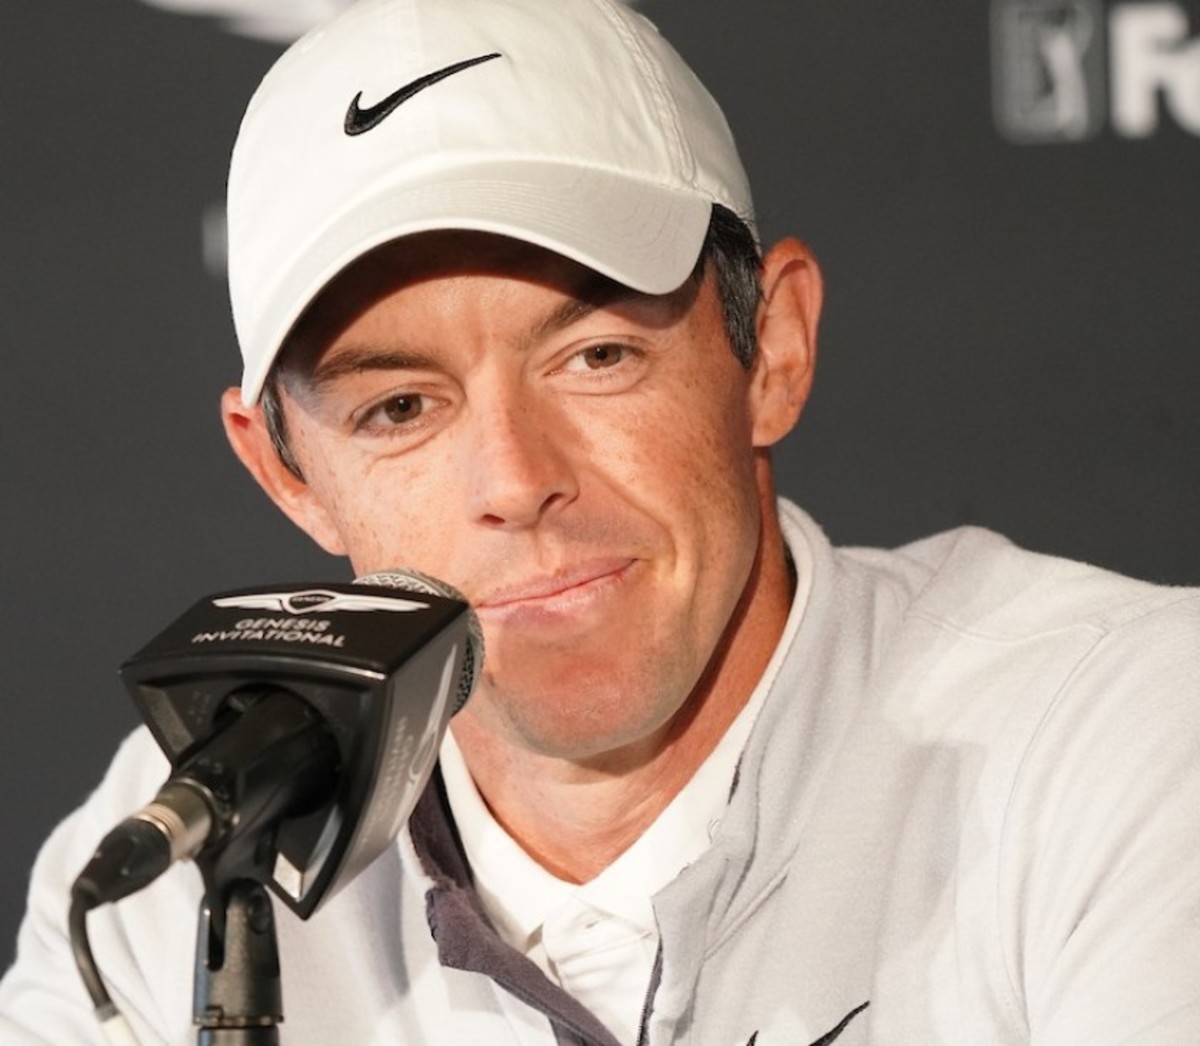 Rory McIlroy emerges not only as No. 1 in the world ranking but also as a leading voice in discussing issues that affect the game. 